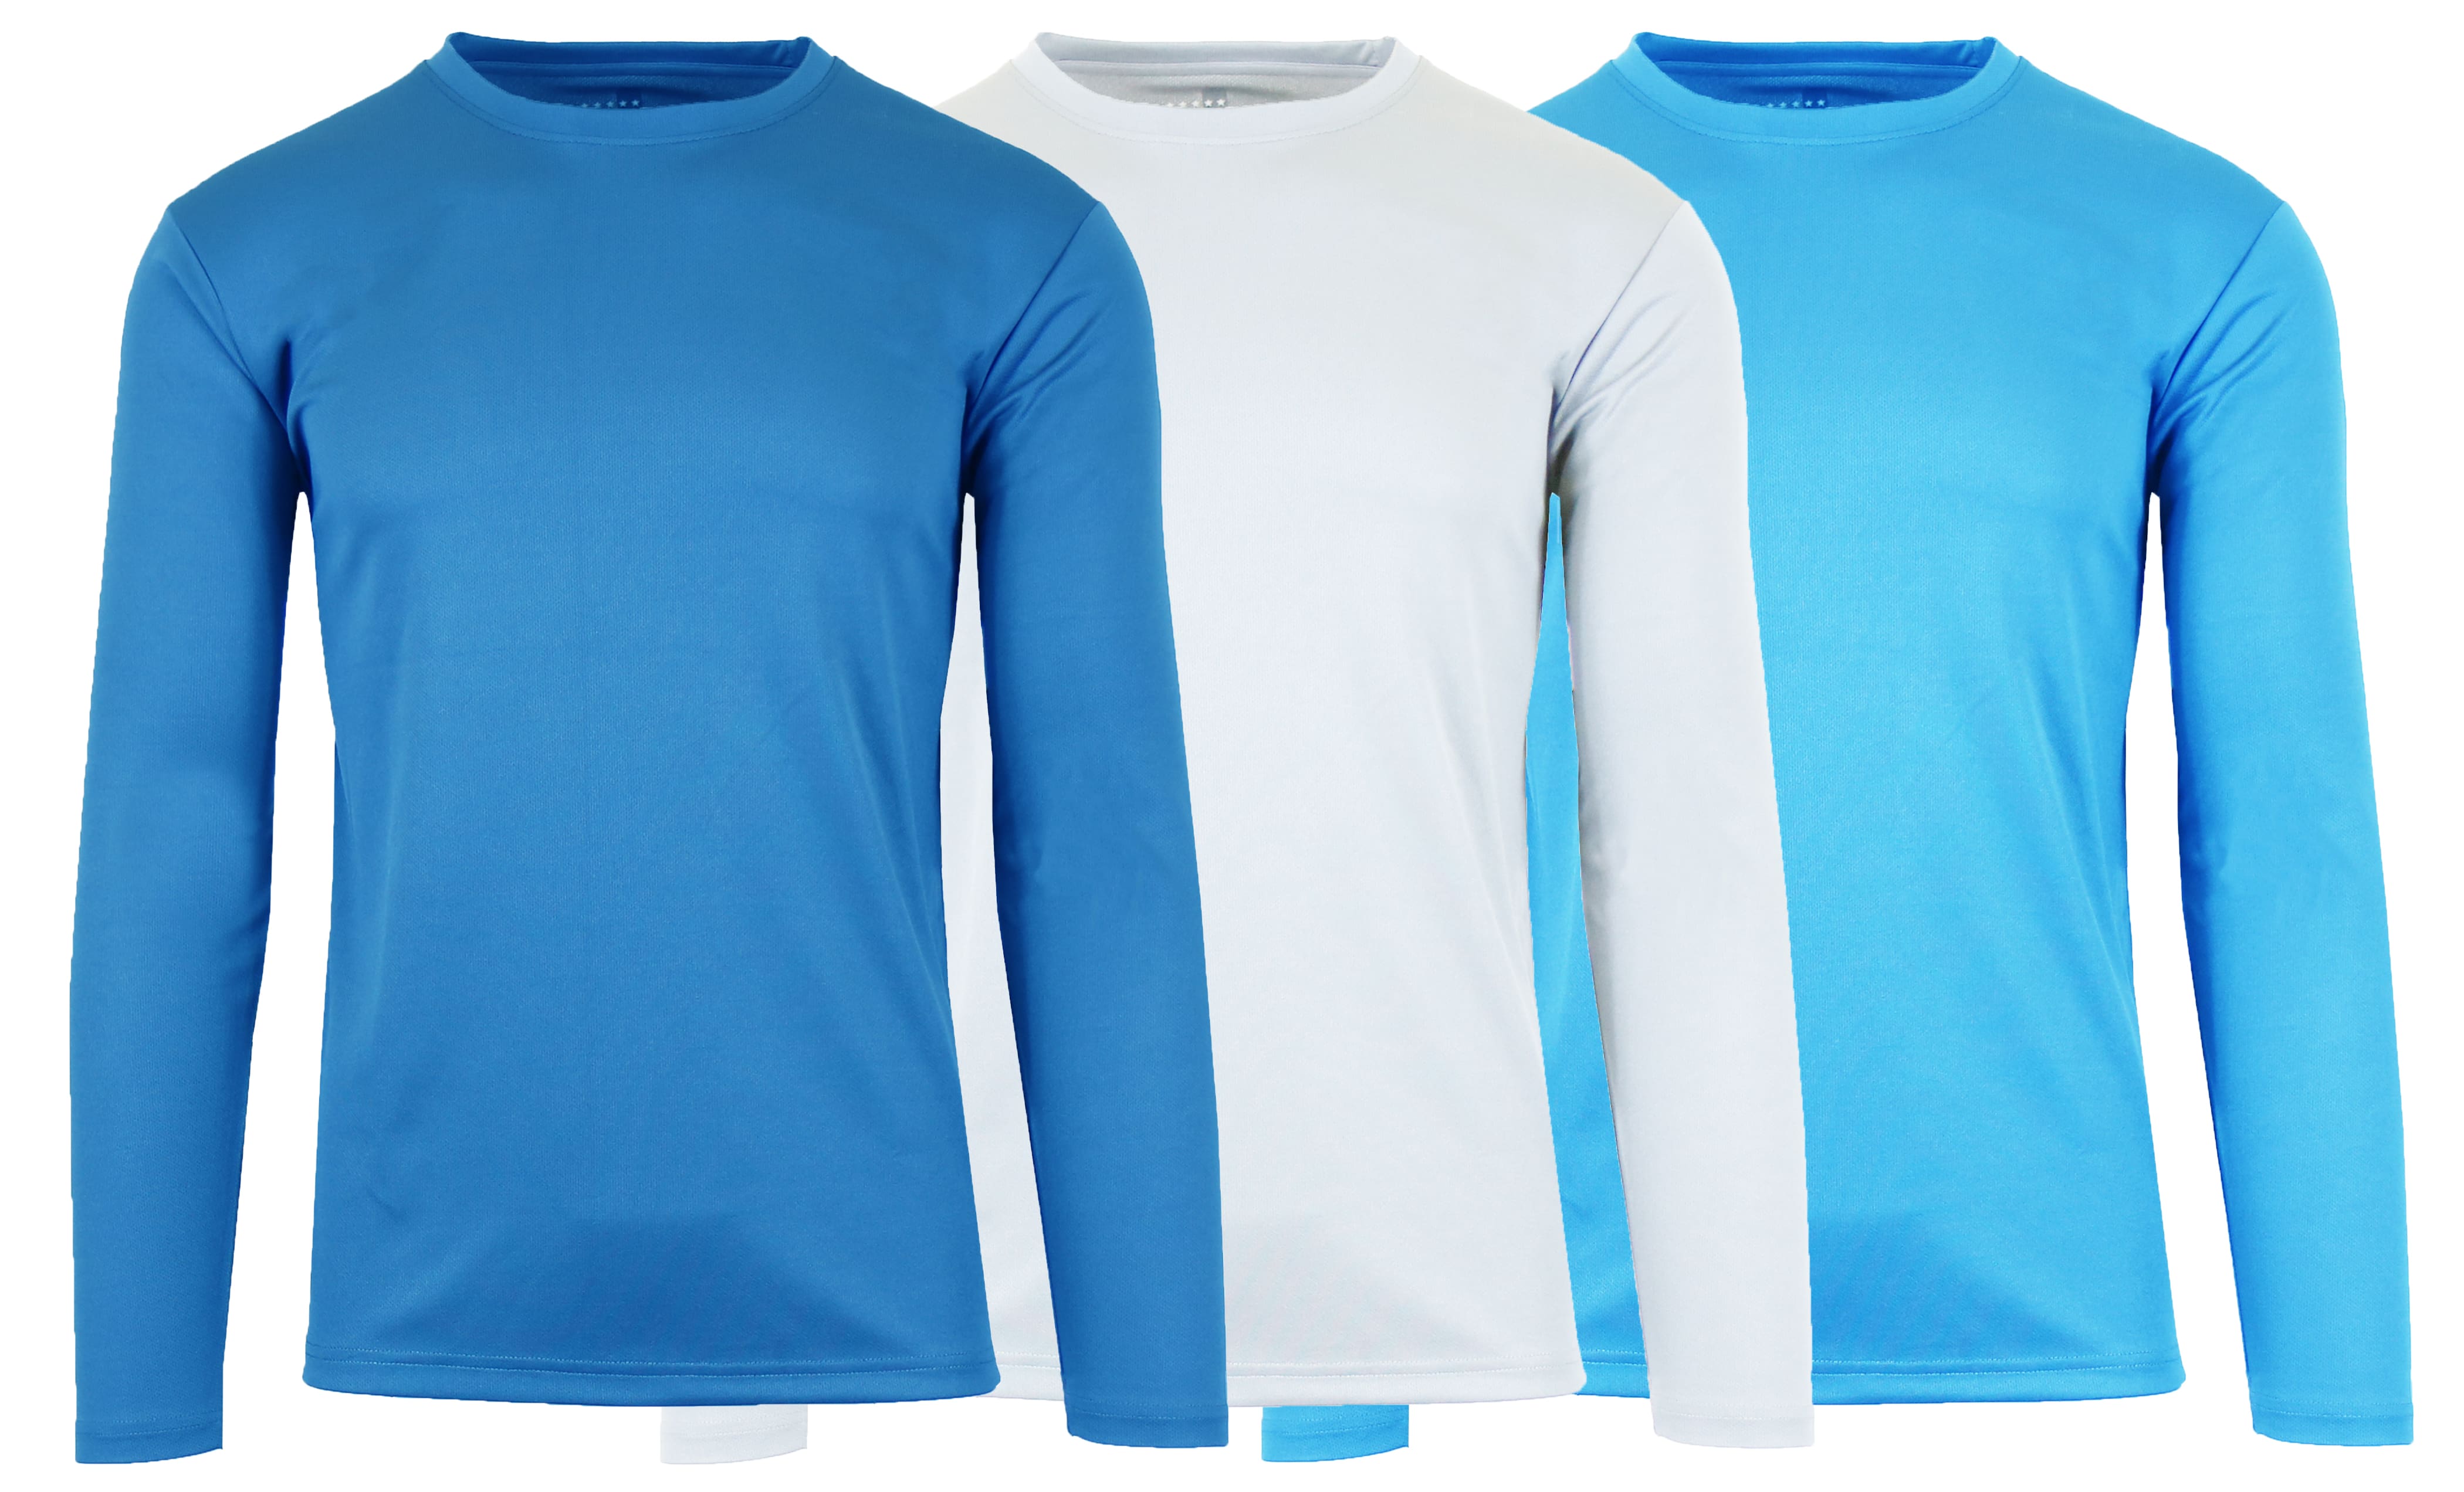 Galaxy by Harvic Long Sleeve Moisture-Wicking Performance Crew Neck Men&#x27;s T-Shirt 3 Pack